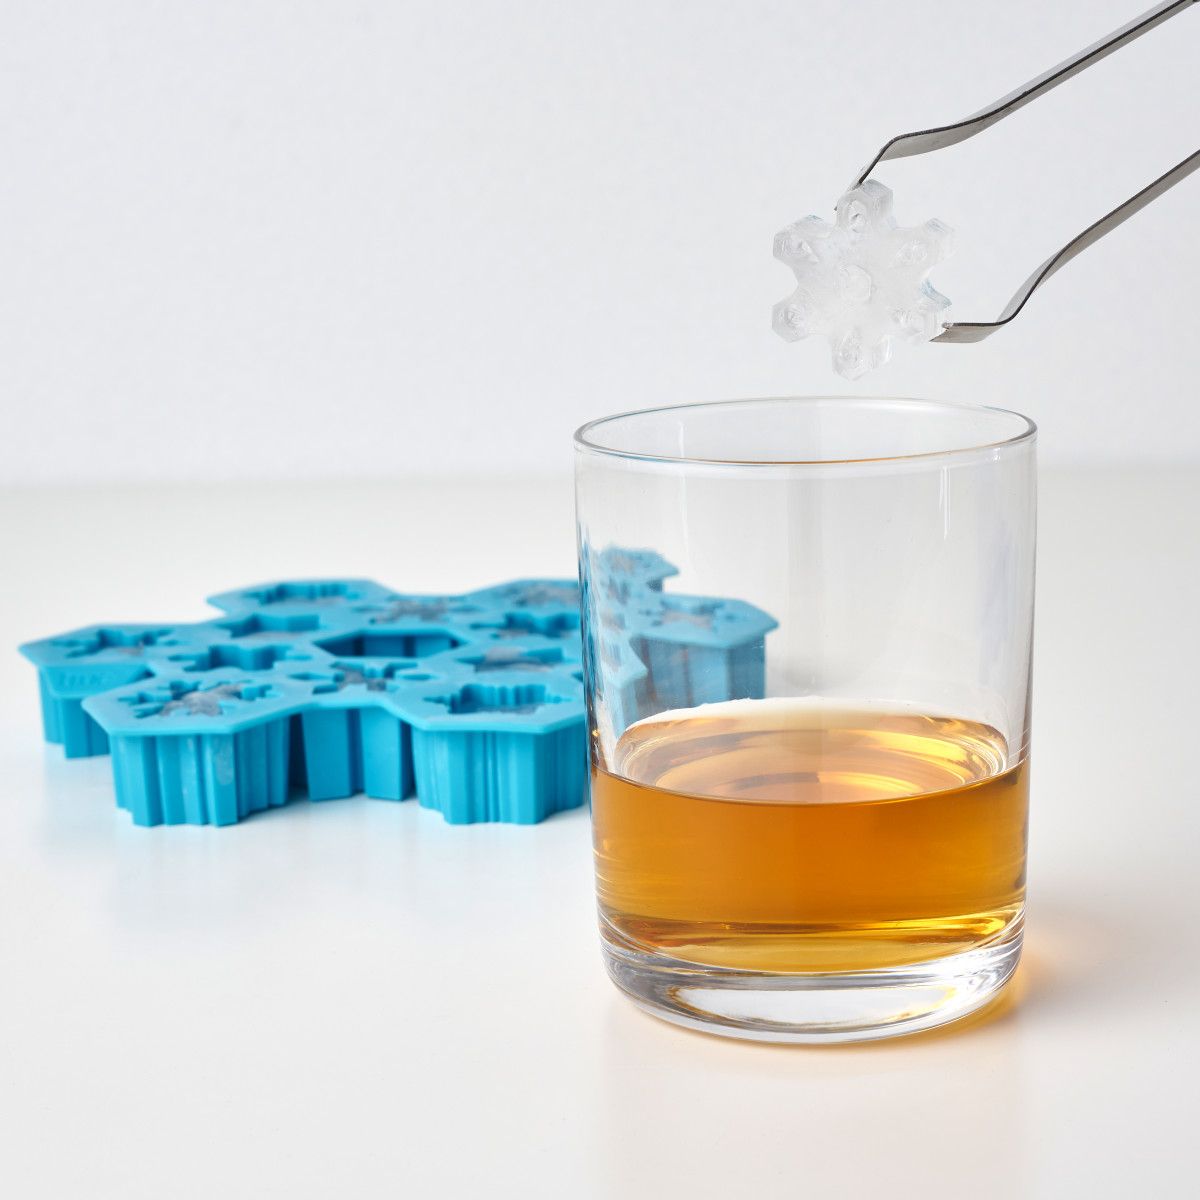 TrueZoo Cold Feet: Animal Paws Silicone Ice Cube Tray by TrueZoo-12 per case